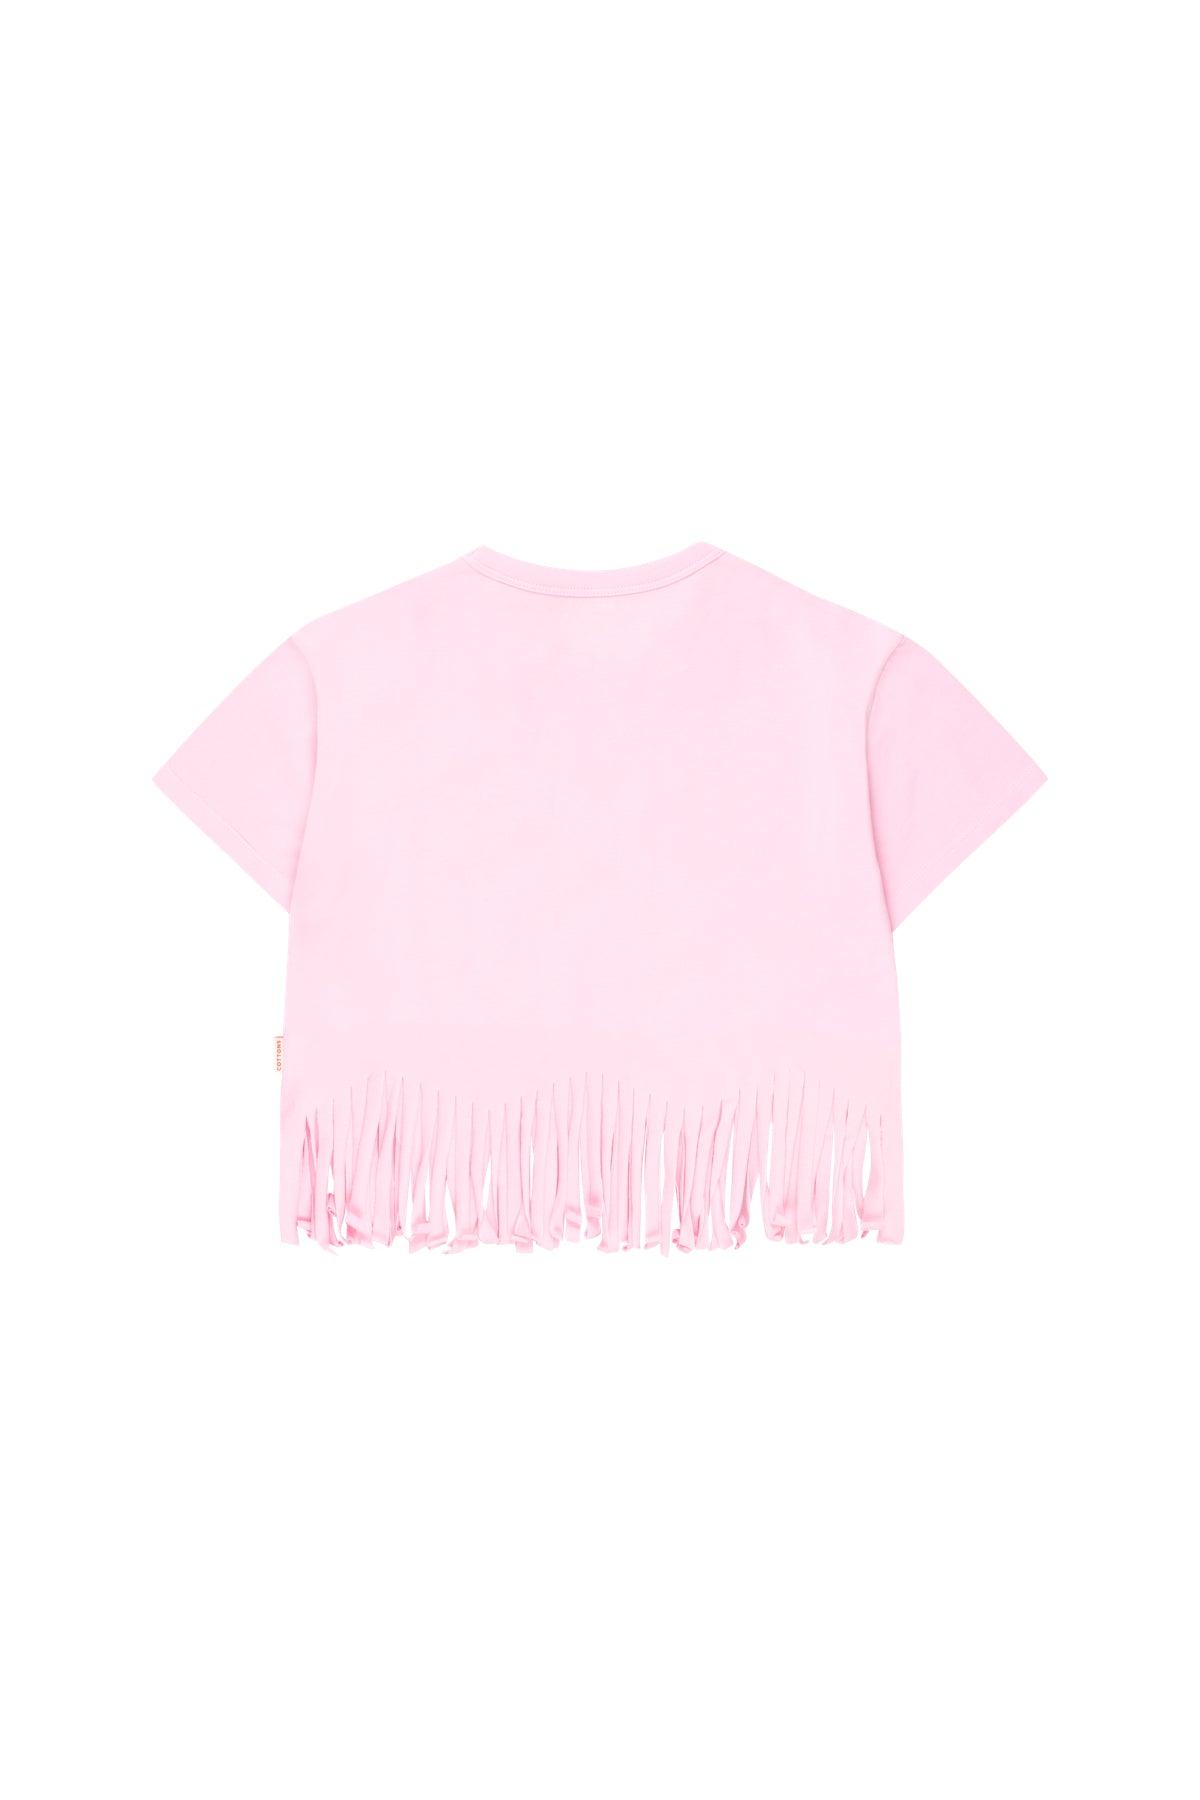 Tiny Cottons Doves Tee - Light Pink